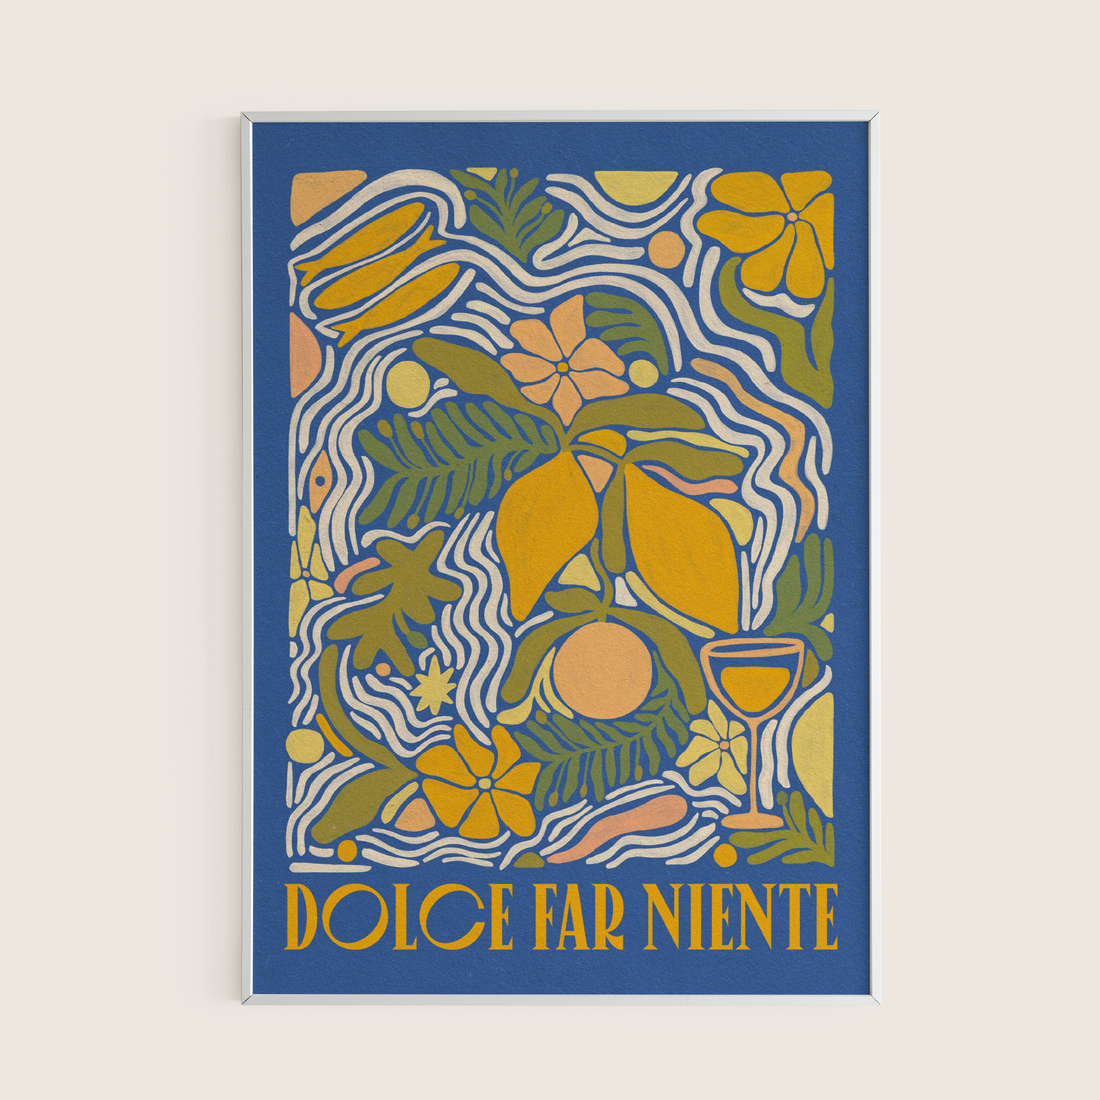 Dolce Far Niente; The Sweetness Of Doing Nothing - Art Print – The ...